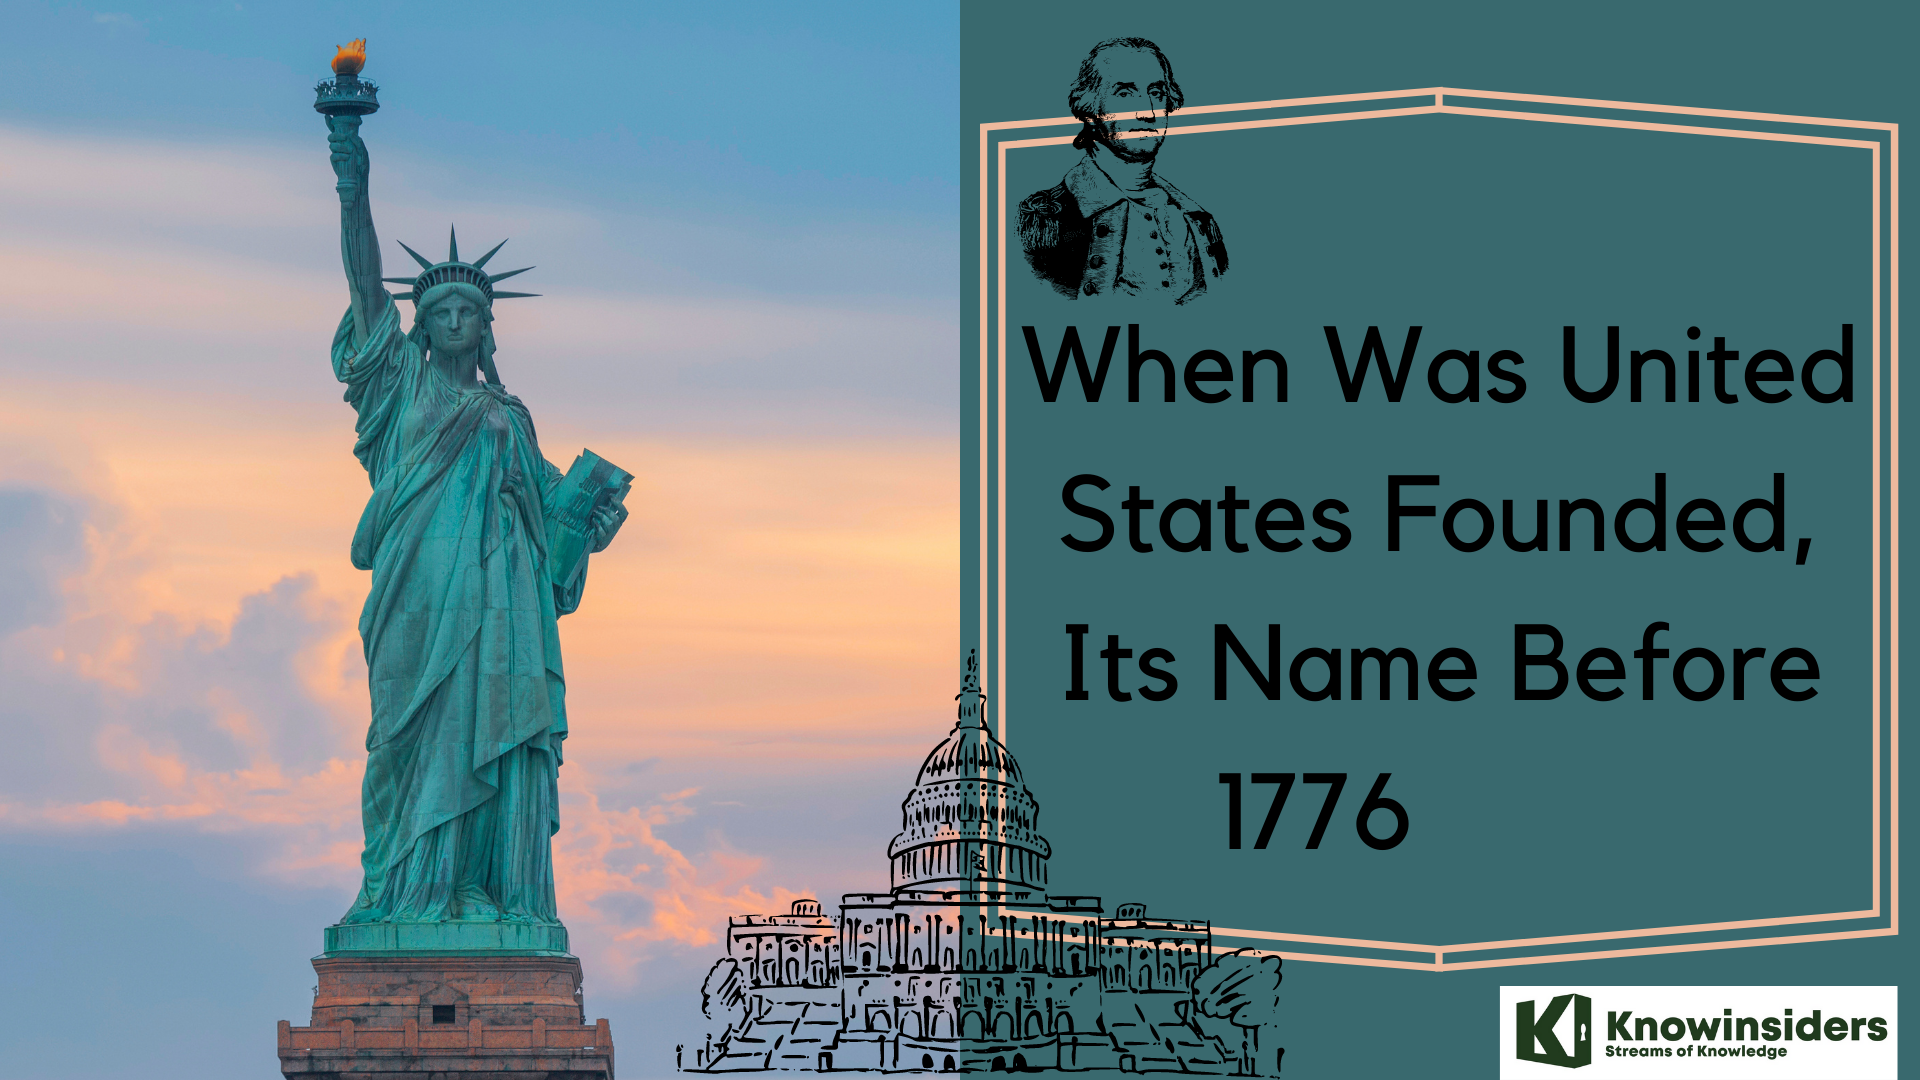 When was United States Founded, Its Name Before 1776 